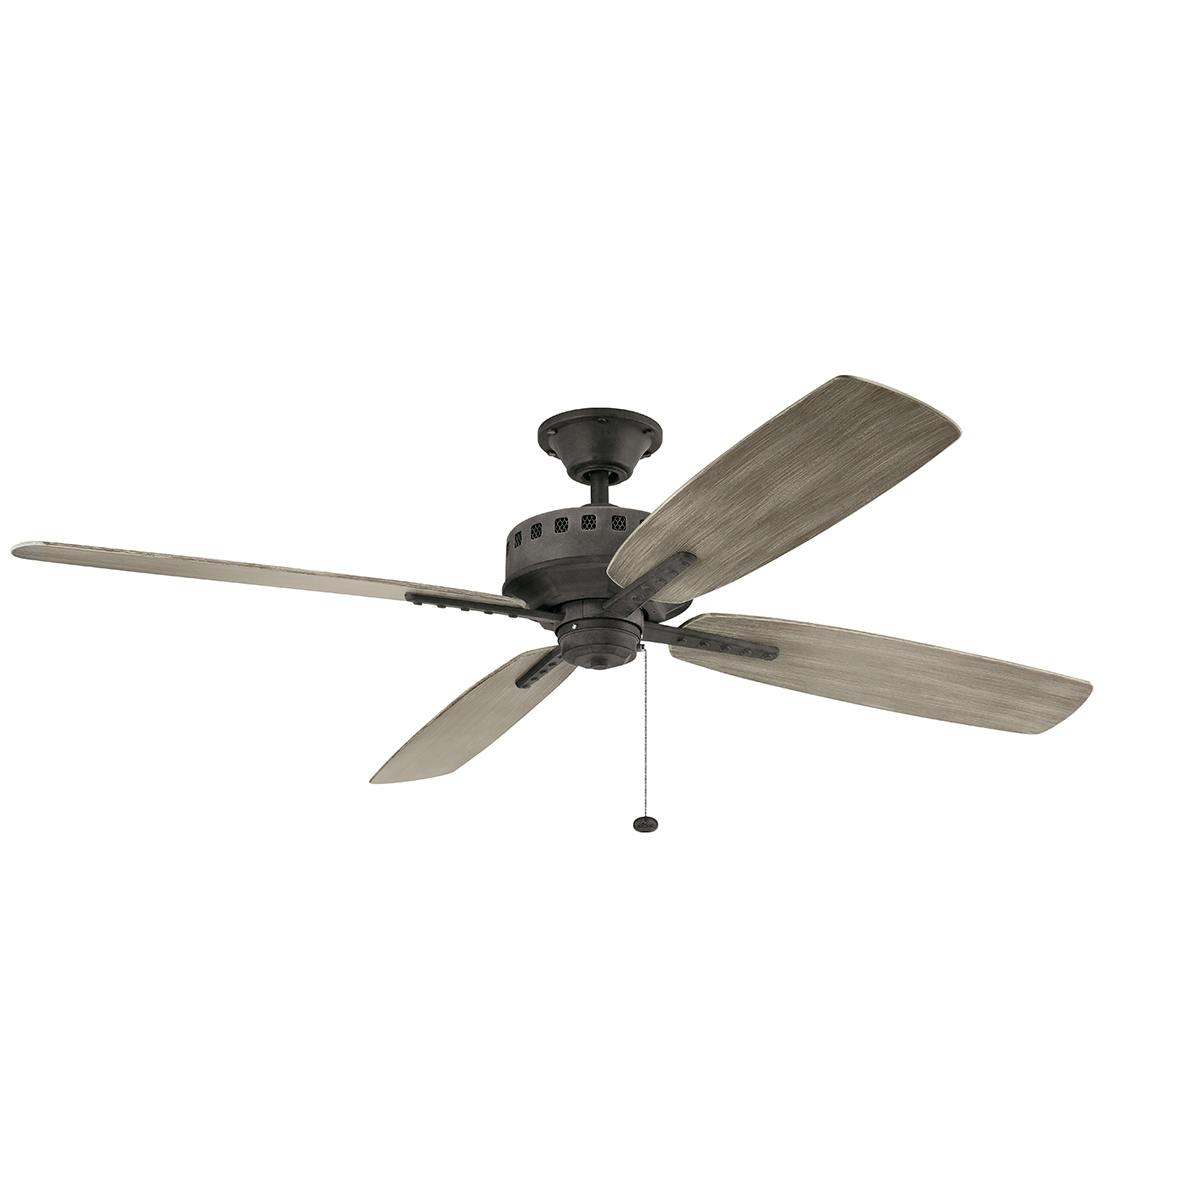 Eads Patio XL 65" Fan in Weathered Zinc on a white background